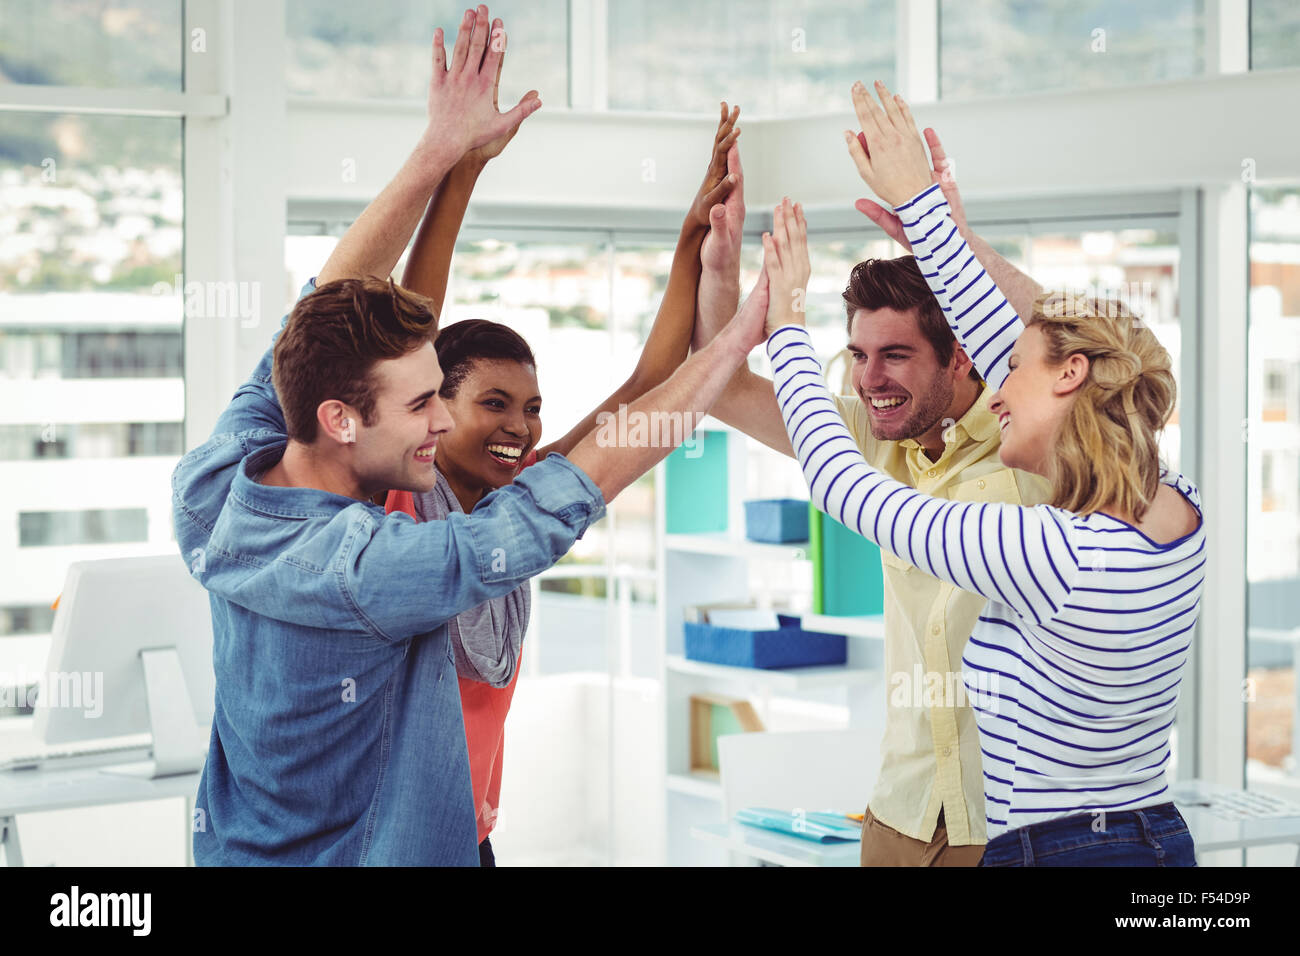 Happy creative team giving high fives to each other Stock Photo